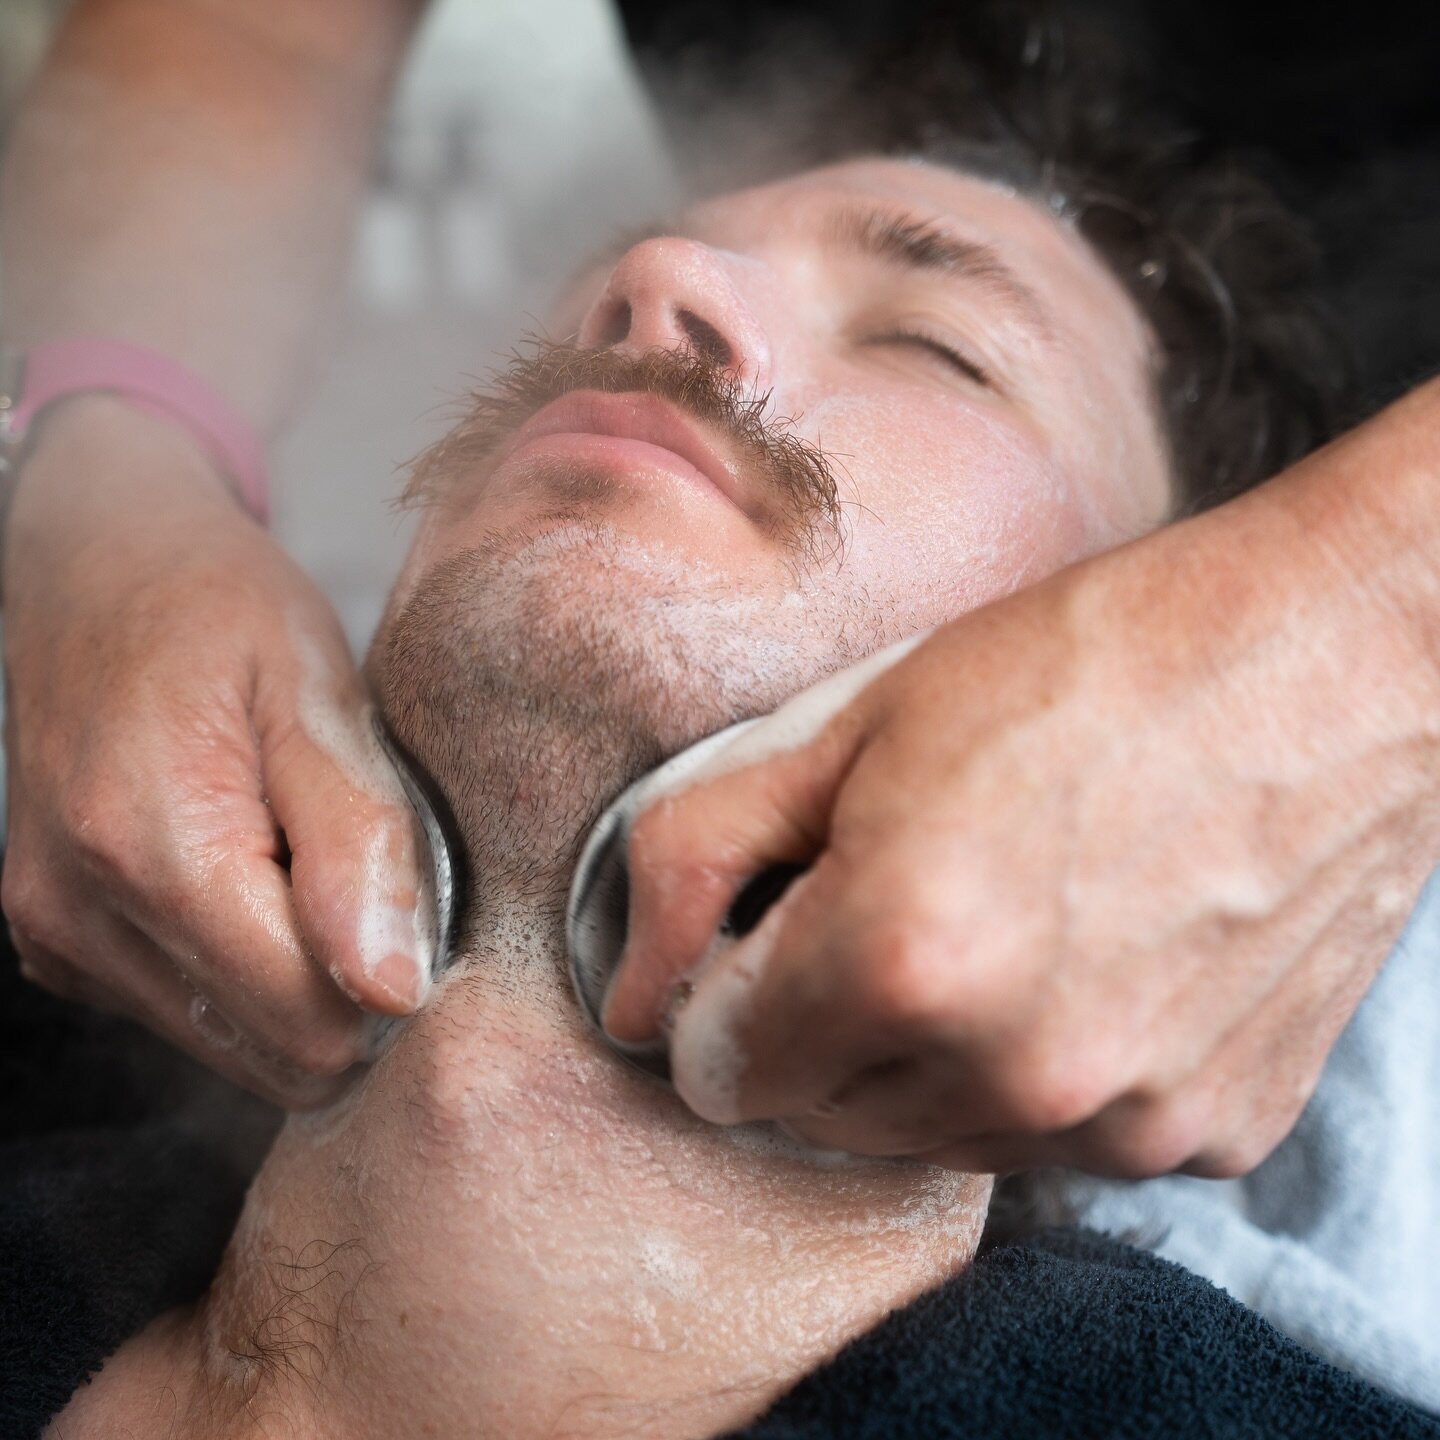 Steam. Scrub. Slicke. 
&bull;
Dieter&rsquo;s Pamper Package features a luxe facial, complementing your haircut and beard grooming. Using Australian made and botanical rich products, each facial is personalised specifically to your skin type. 
&bull;
